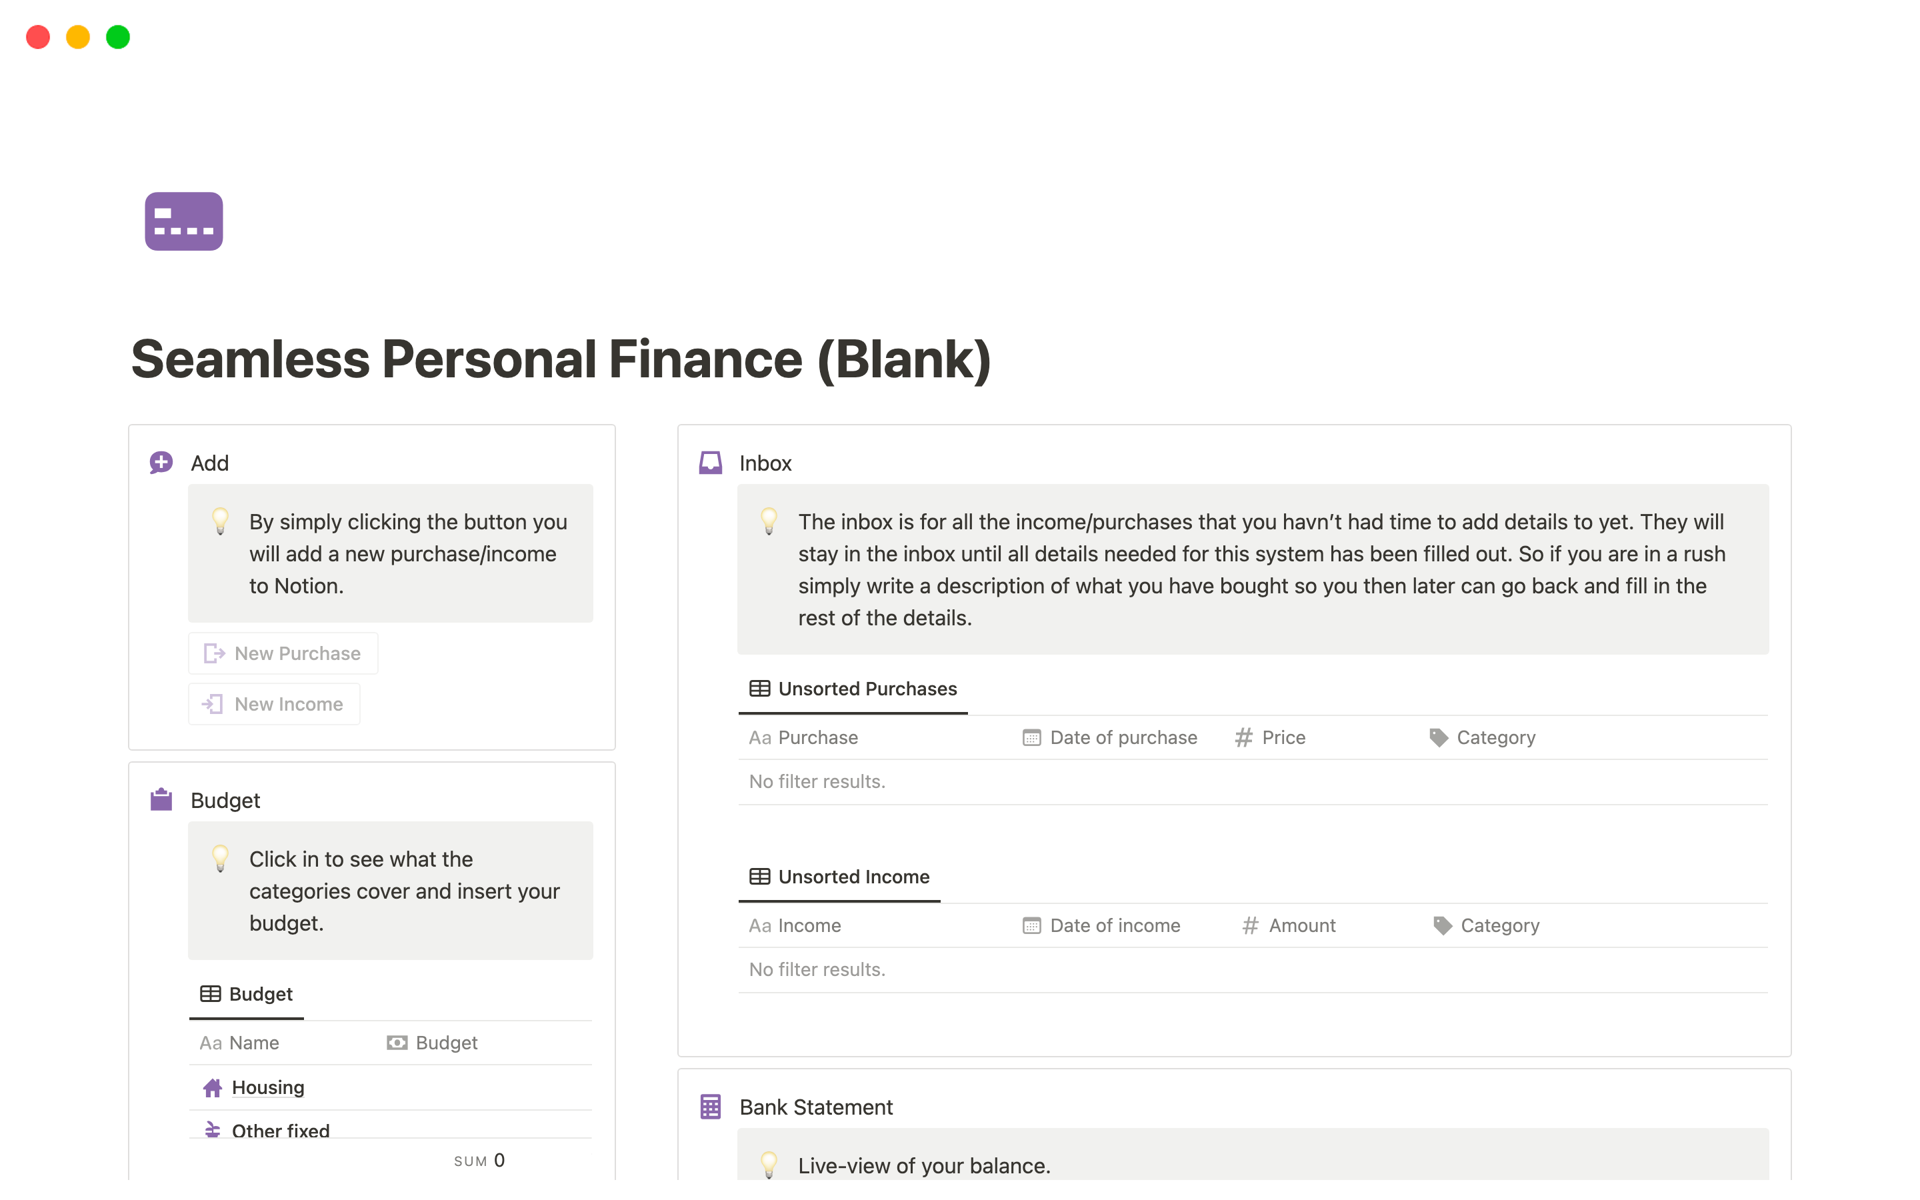 This is the most seamless and easy to use template for managing personal finance.